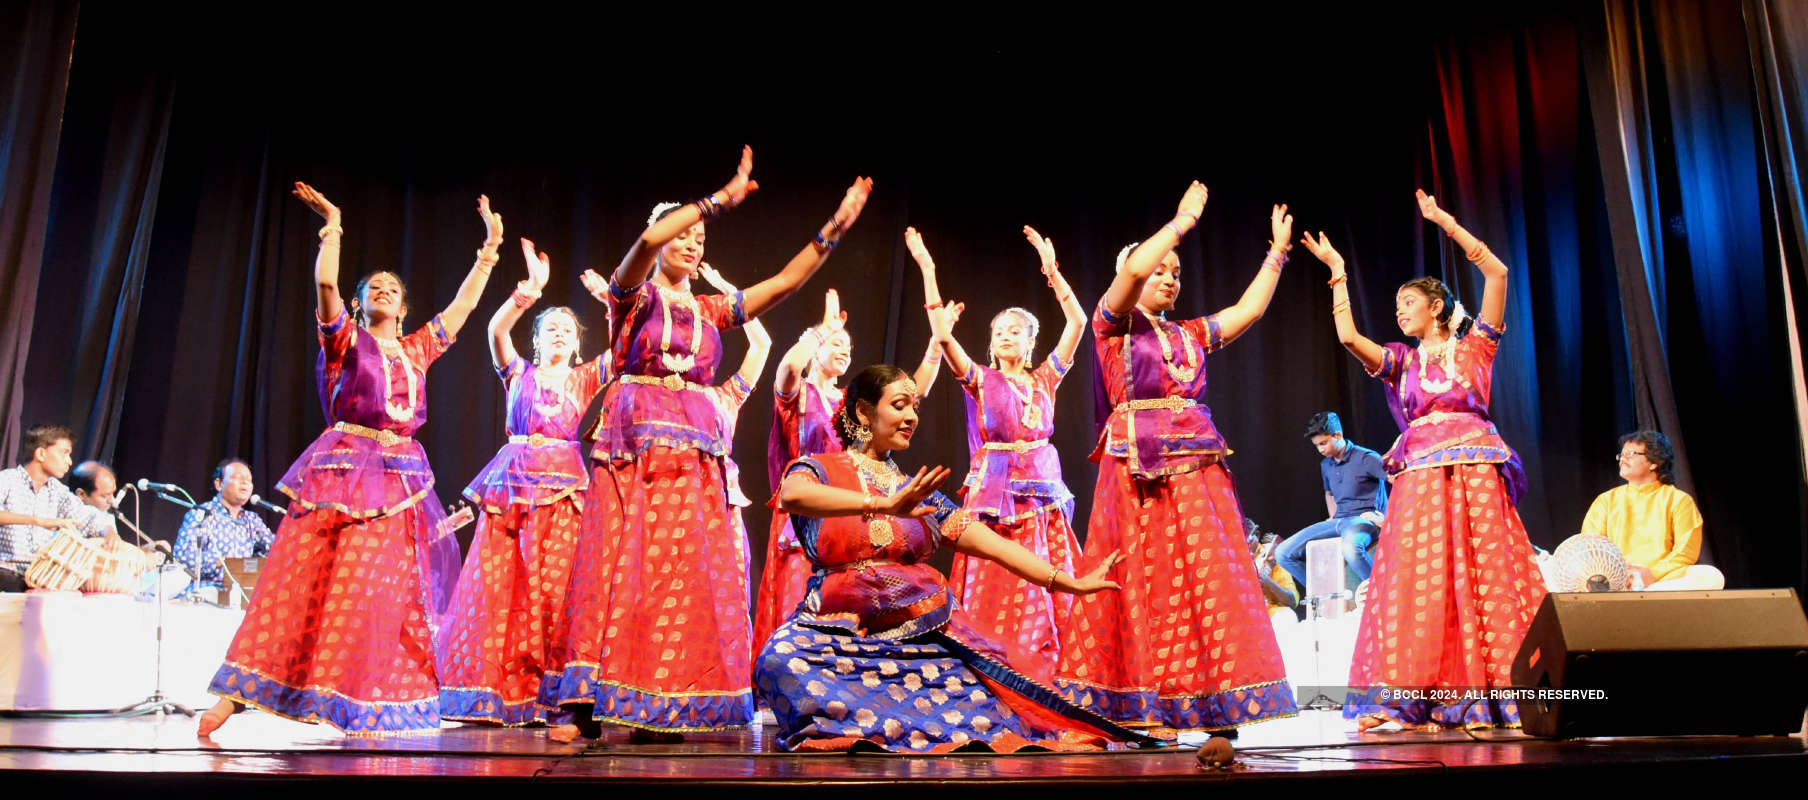 A scintillating performance thrilled classical dance lovers